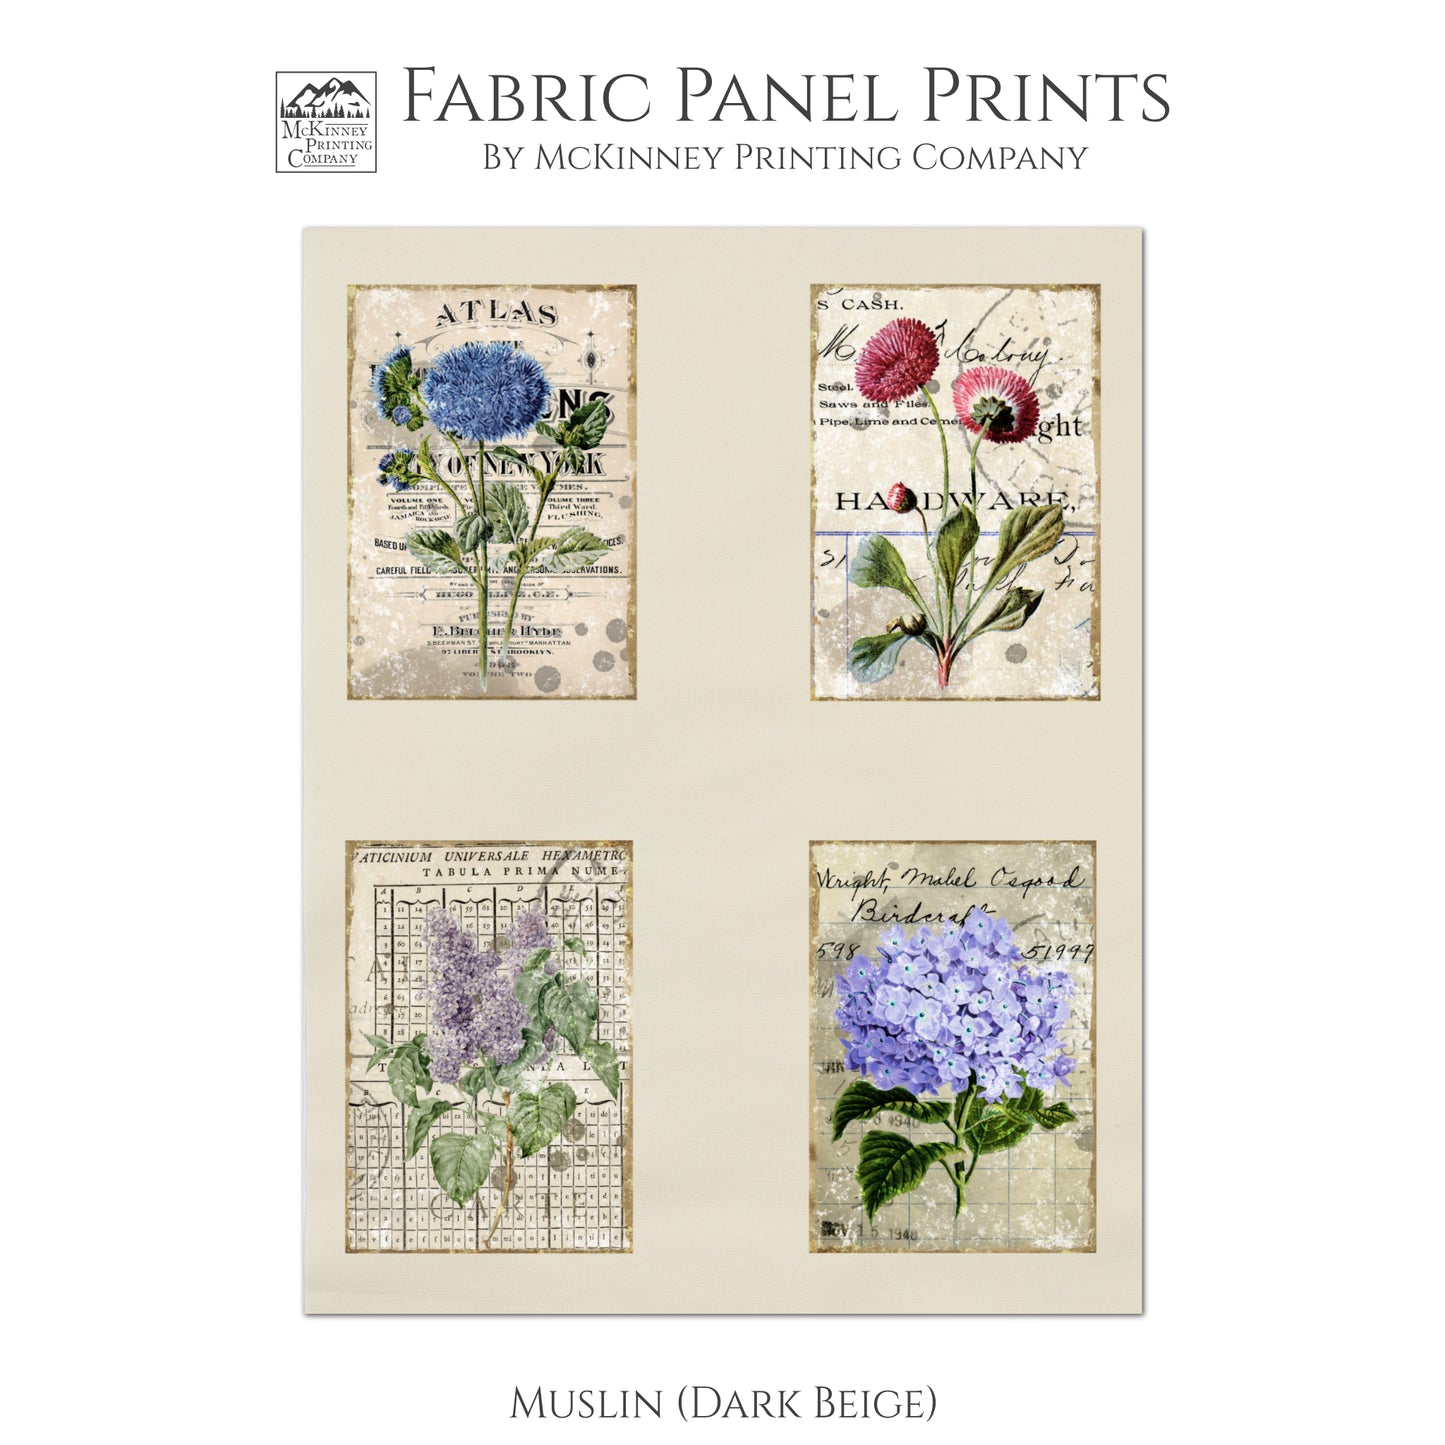 abric Panels - Floral Patches, Shabby Chic, Small Print Quilt Block, French Flower - Muslin